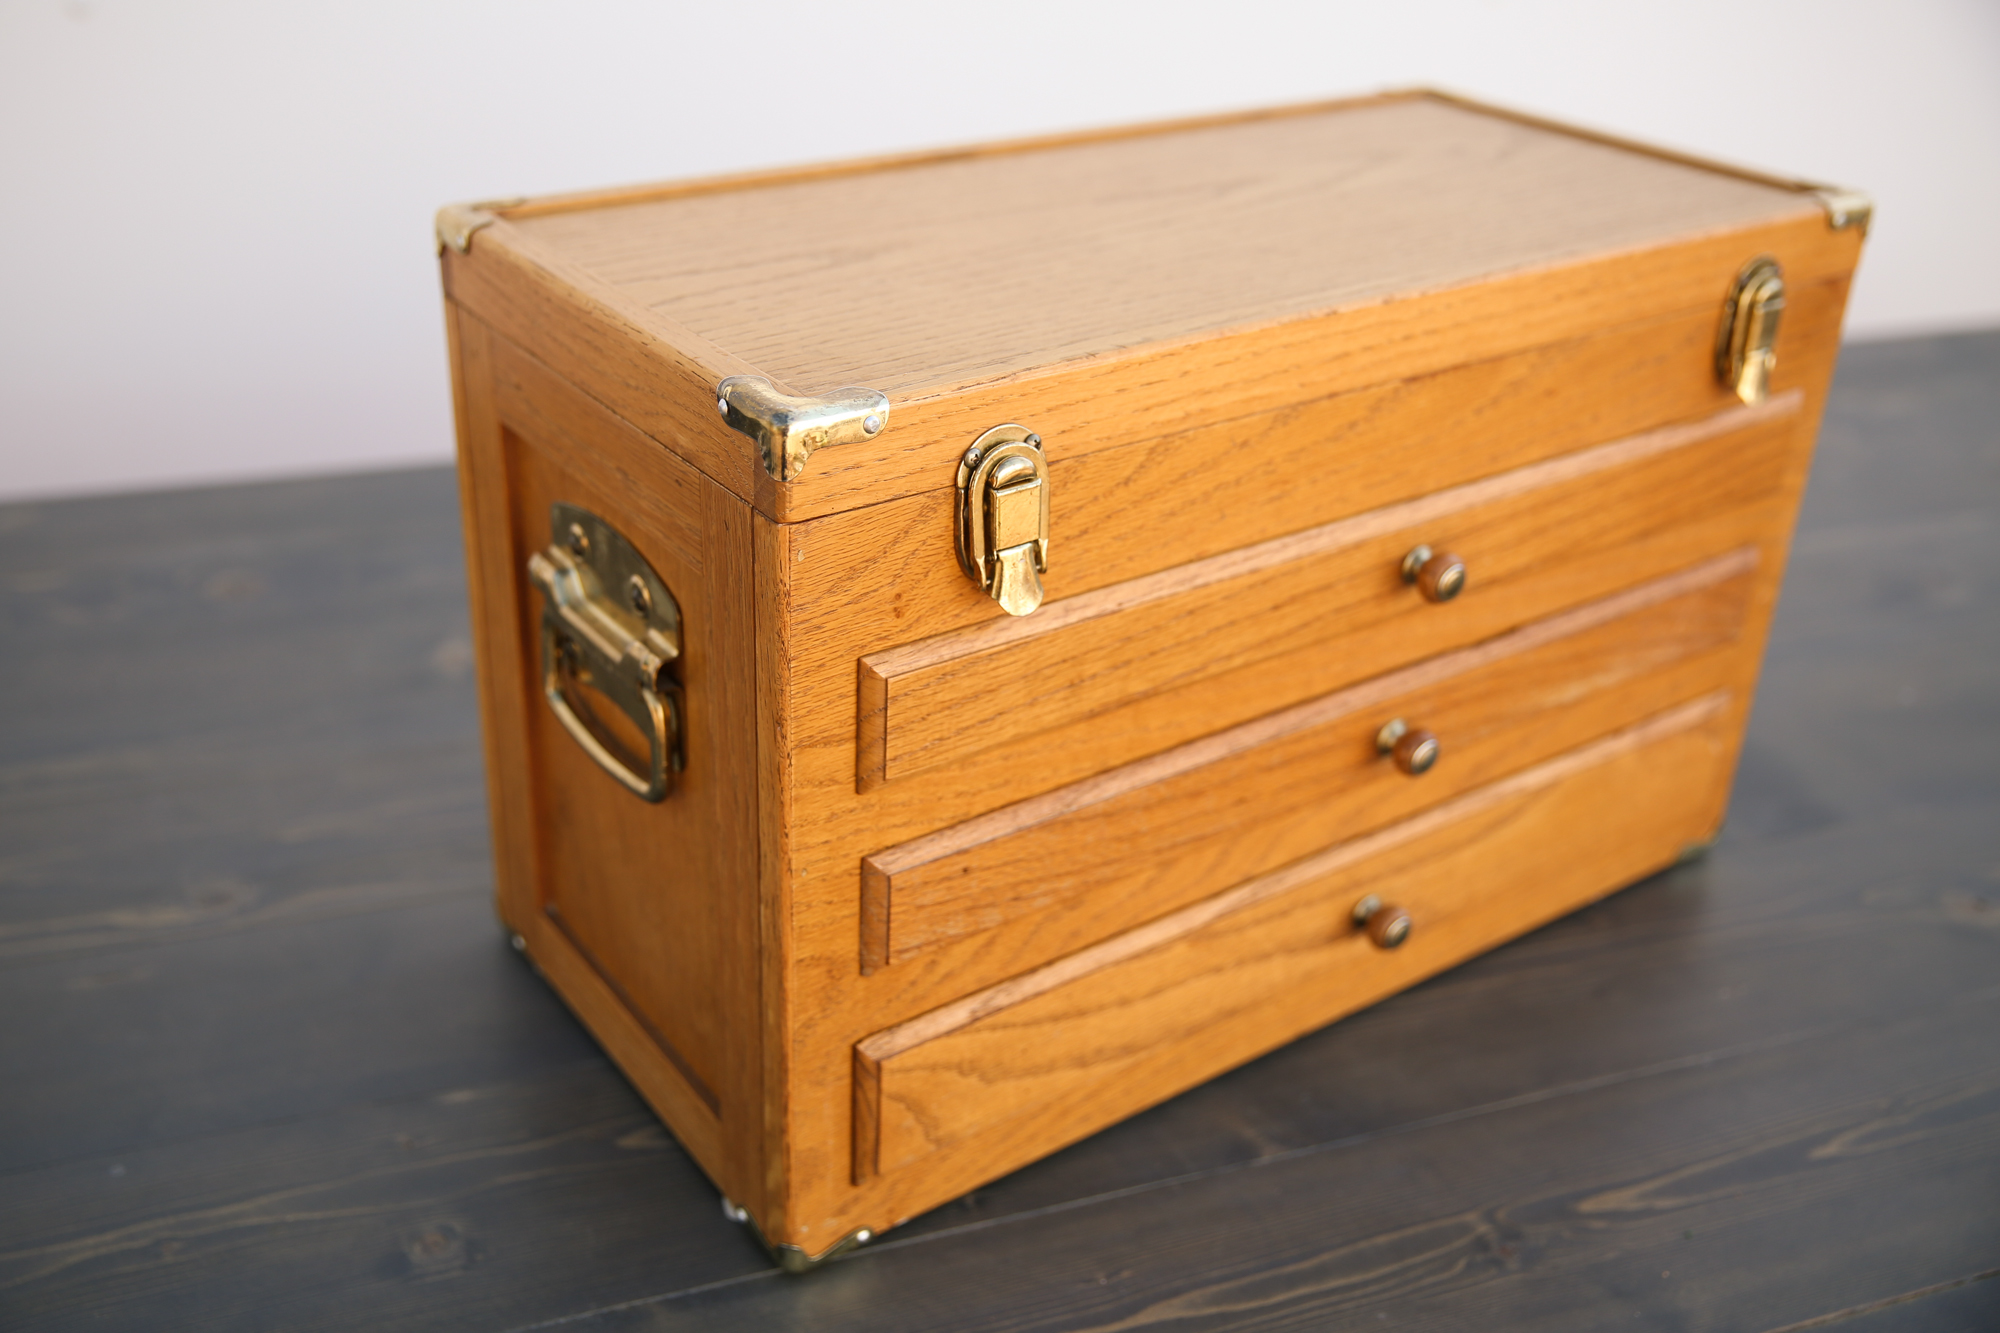 Small Wooden Chest Out Of The Dust, Small Wooden Chests For Storage